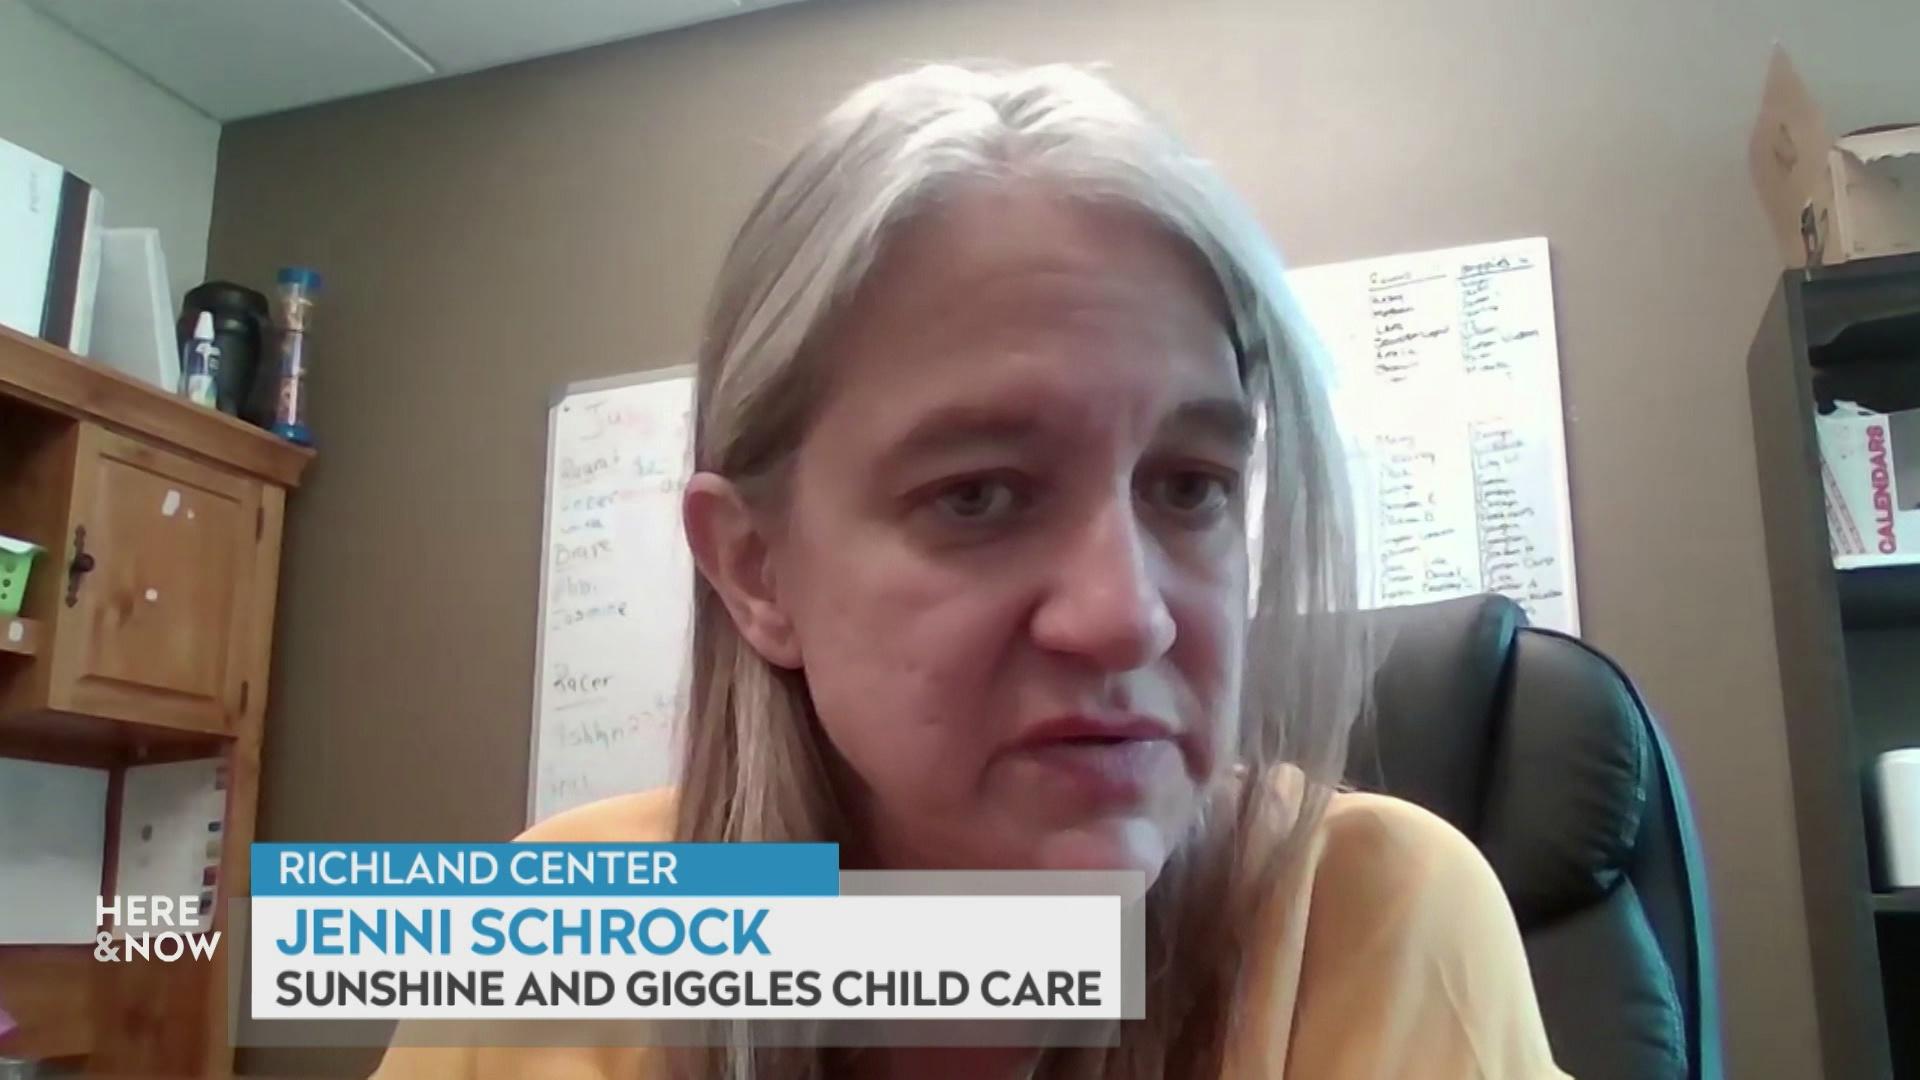 A still image from a video shows Jenni Schrock seated in front of a wooden wall with a whiteboard with a graphic at bottom reading 'Richland Center,' 'Jenni Schrock' and 'Sunshine and Giggles Child Care.'